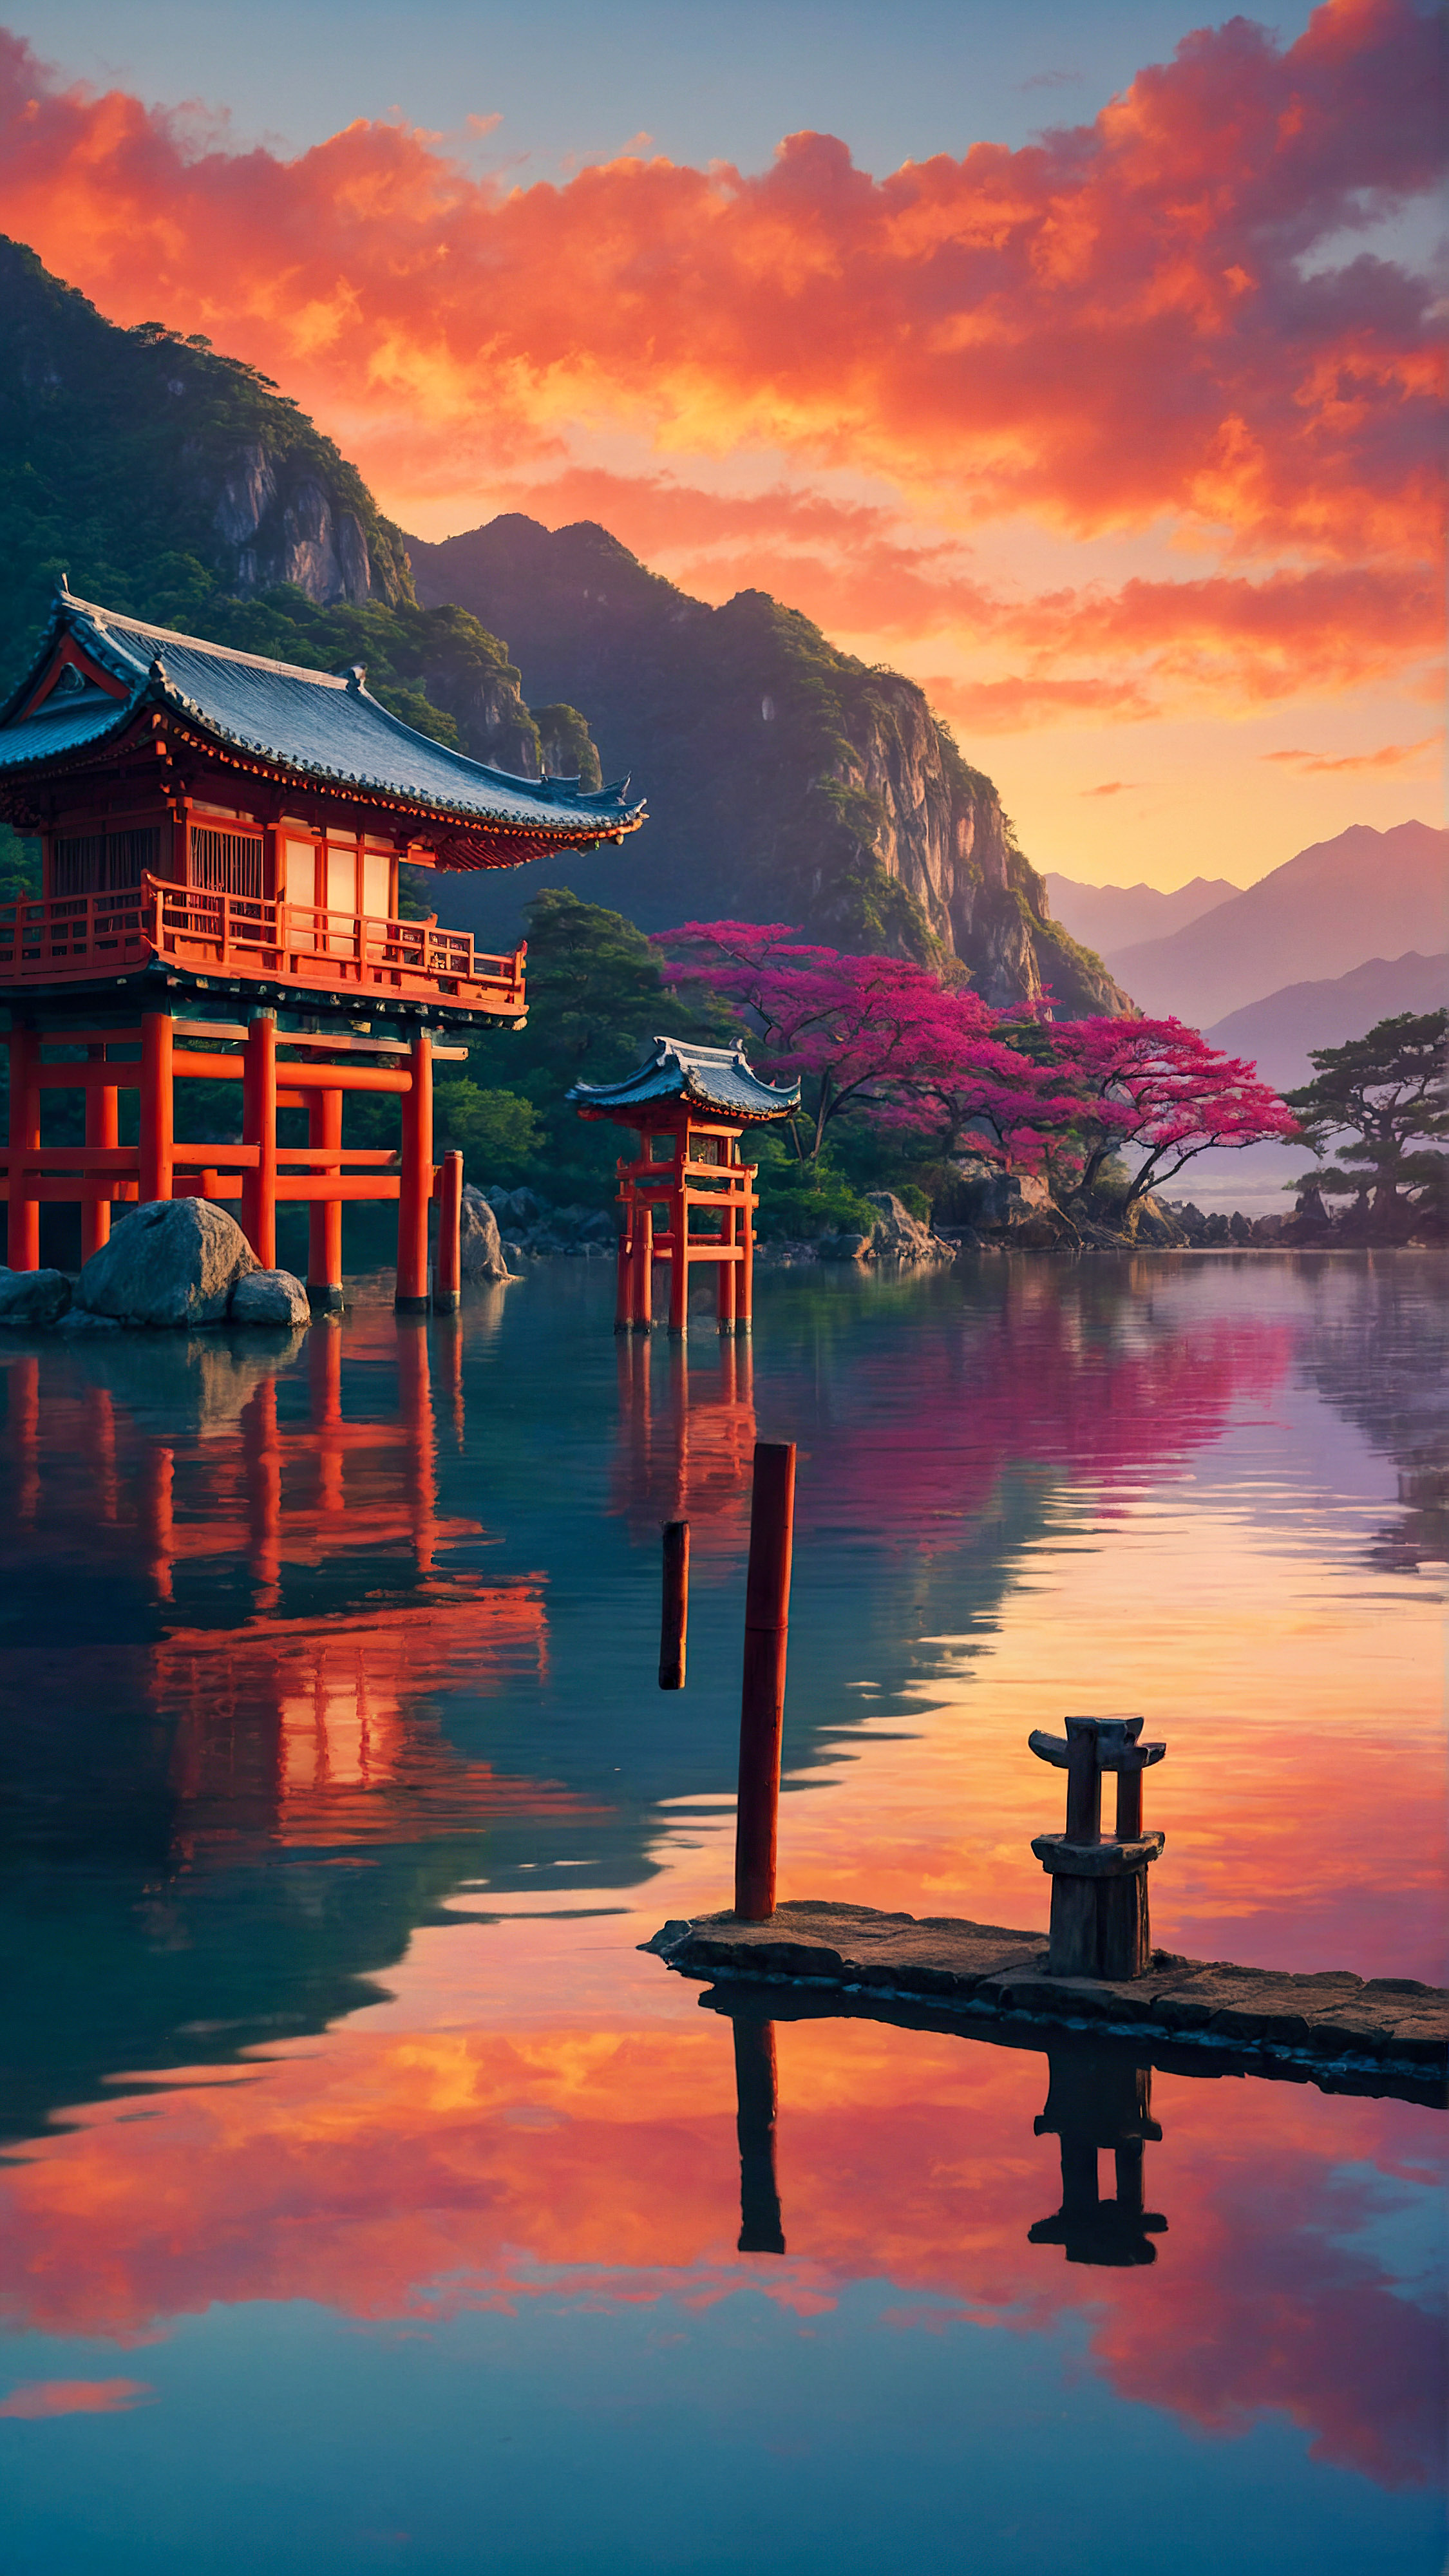 Transform your device’s screen with our iPhone background, a vibrant, colorful illustration of a serene and mystical Asian landscape at sunset, featuring mountains, a traditional building, and a torii gate reflected in the calm waters below, taking you on a visual journey to the East.